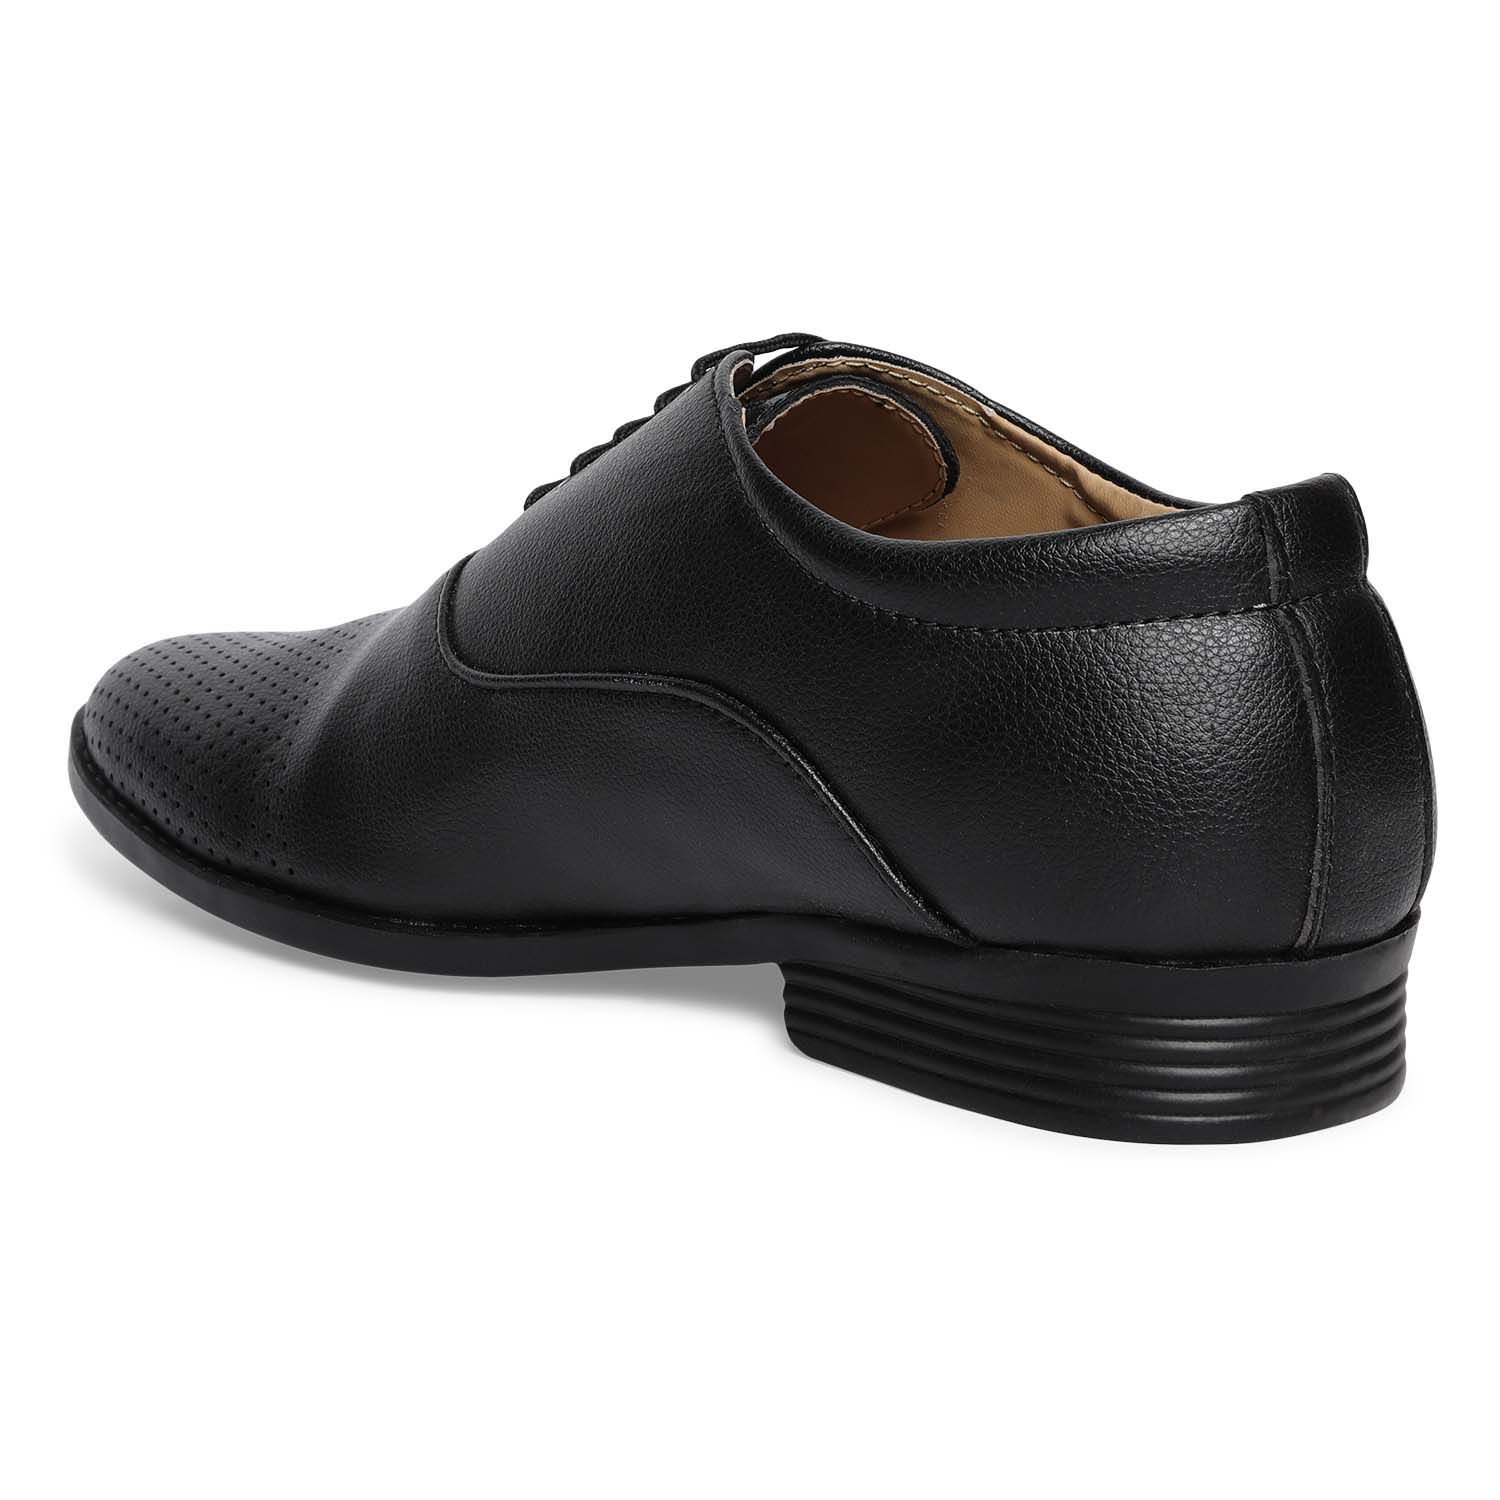 Paragon Black Formal Shoes Price in 